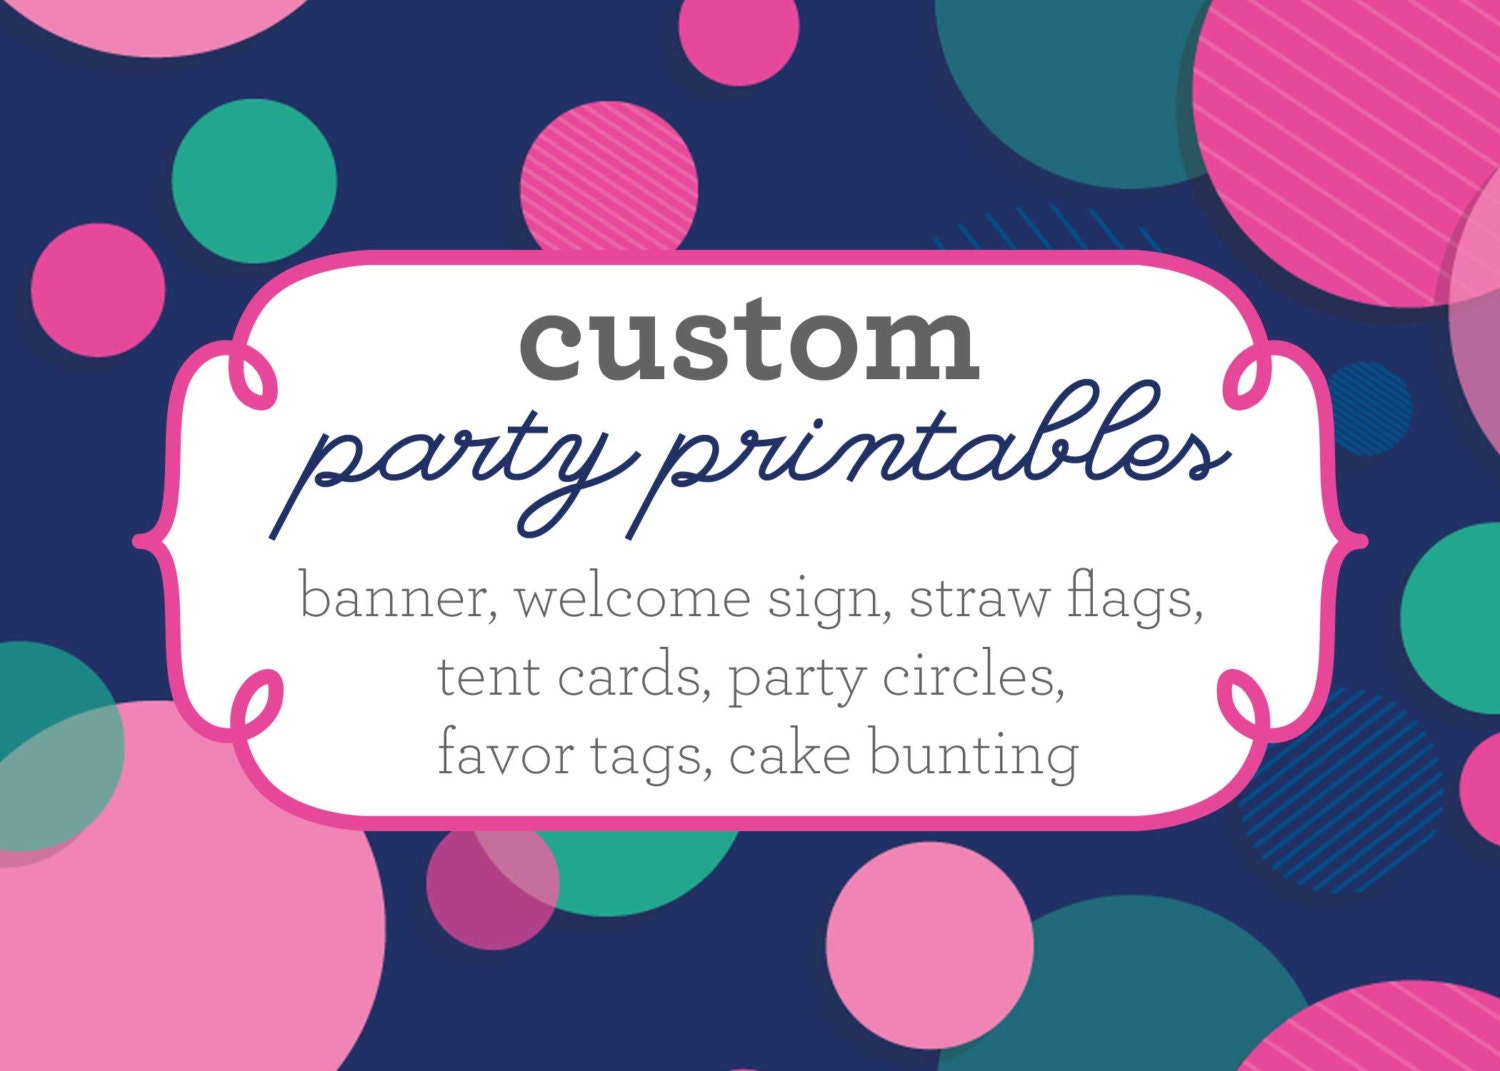 Custom Party Printable Design Invitation Banner Welcome